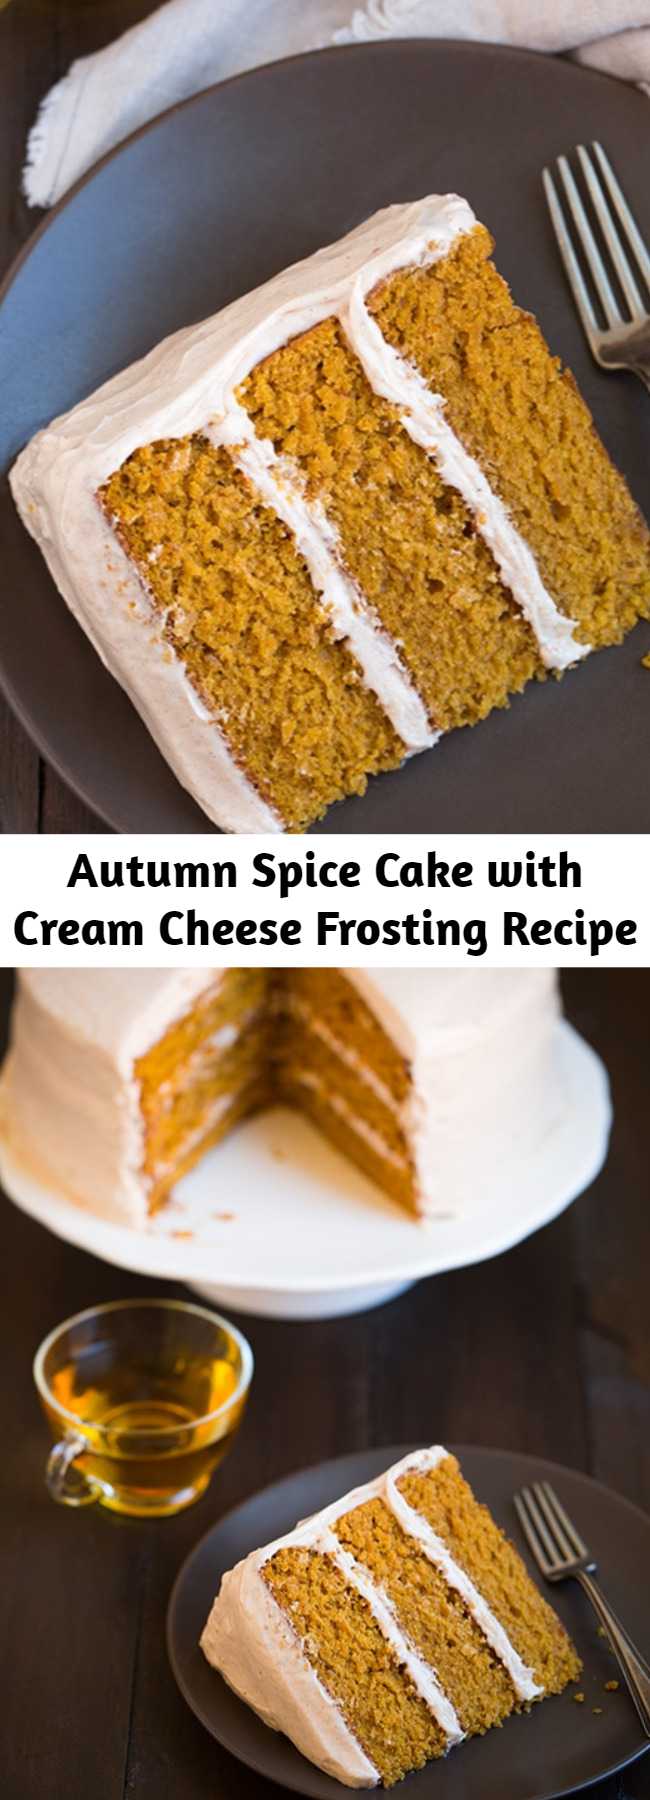 Autumn Spice Cake with Cream Cheese Frosting Recipe - This is one of my all time favorite fall cakes! It's perfectly moist and brimming with lots of those sweet autumn spices. It has a tender crumb and so much flavor in every bite. No one can resist a slice!